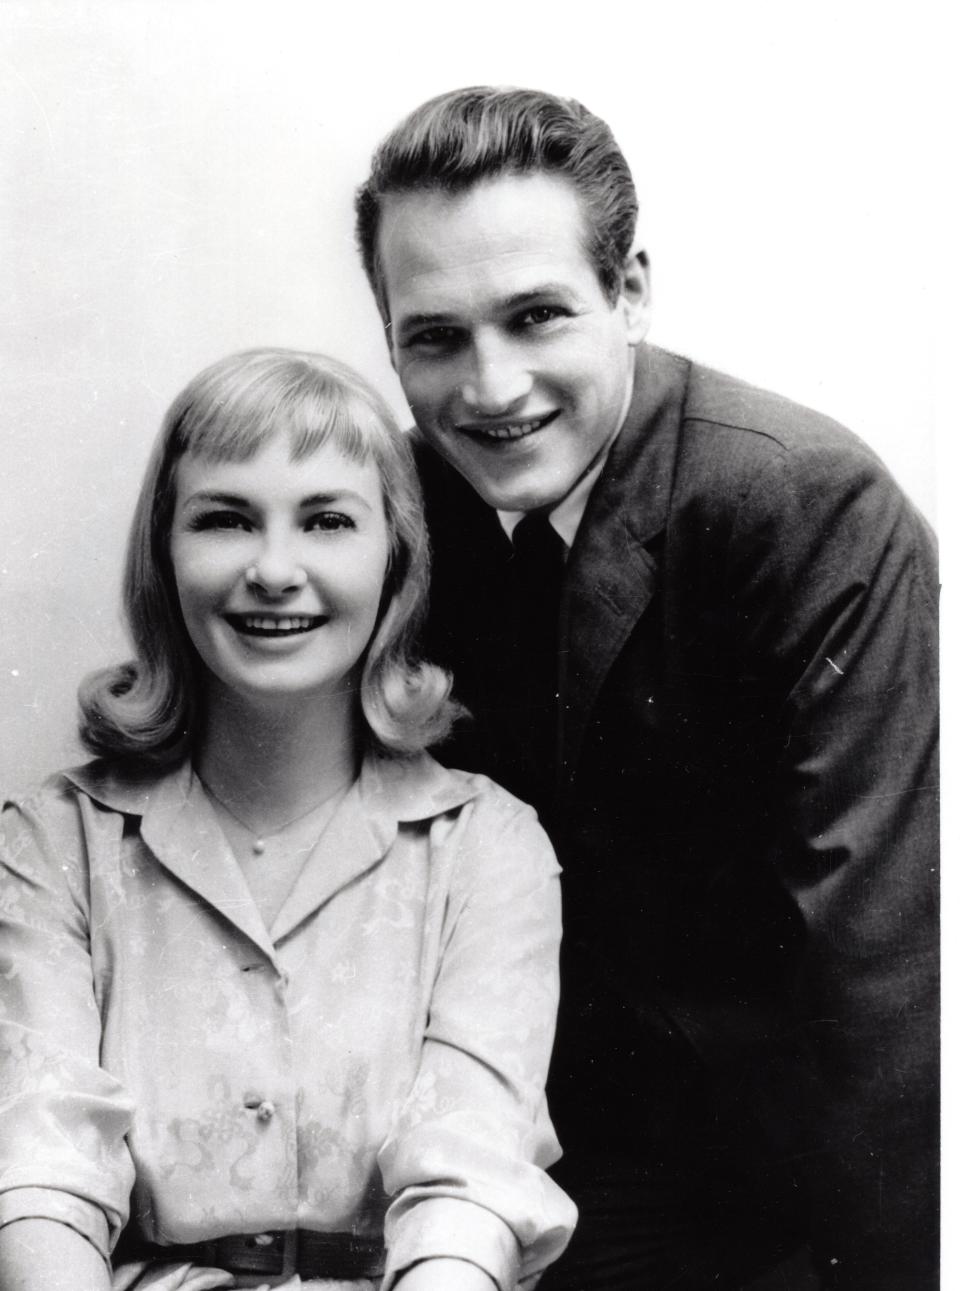 Joanne Woodward and Paul Newman in their engagement photo.